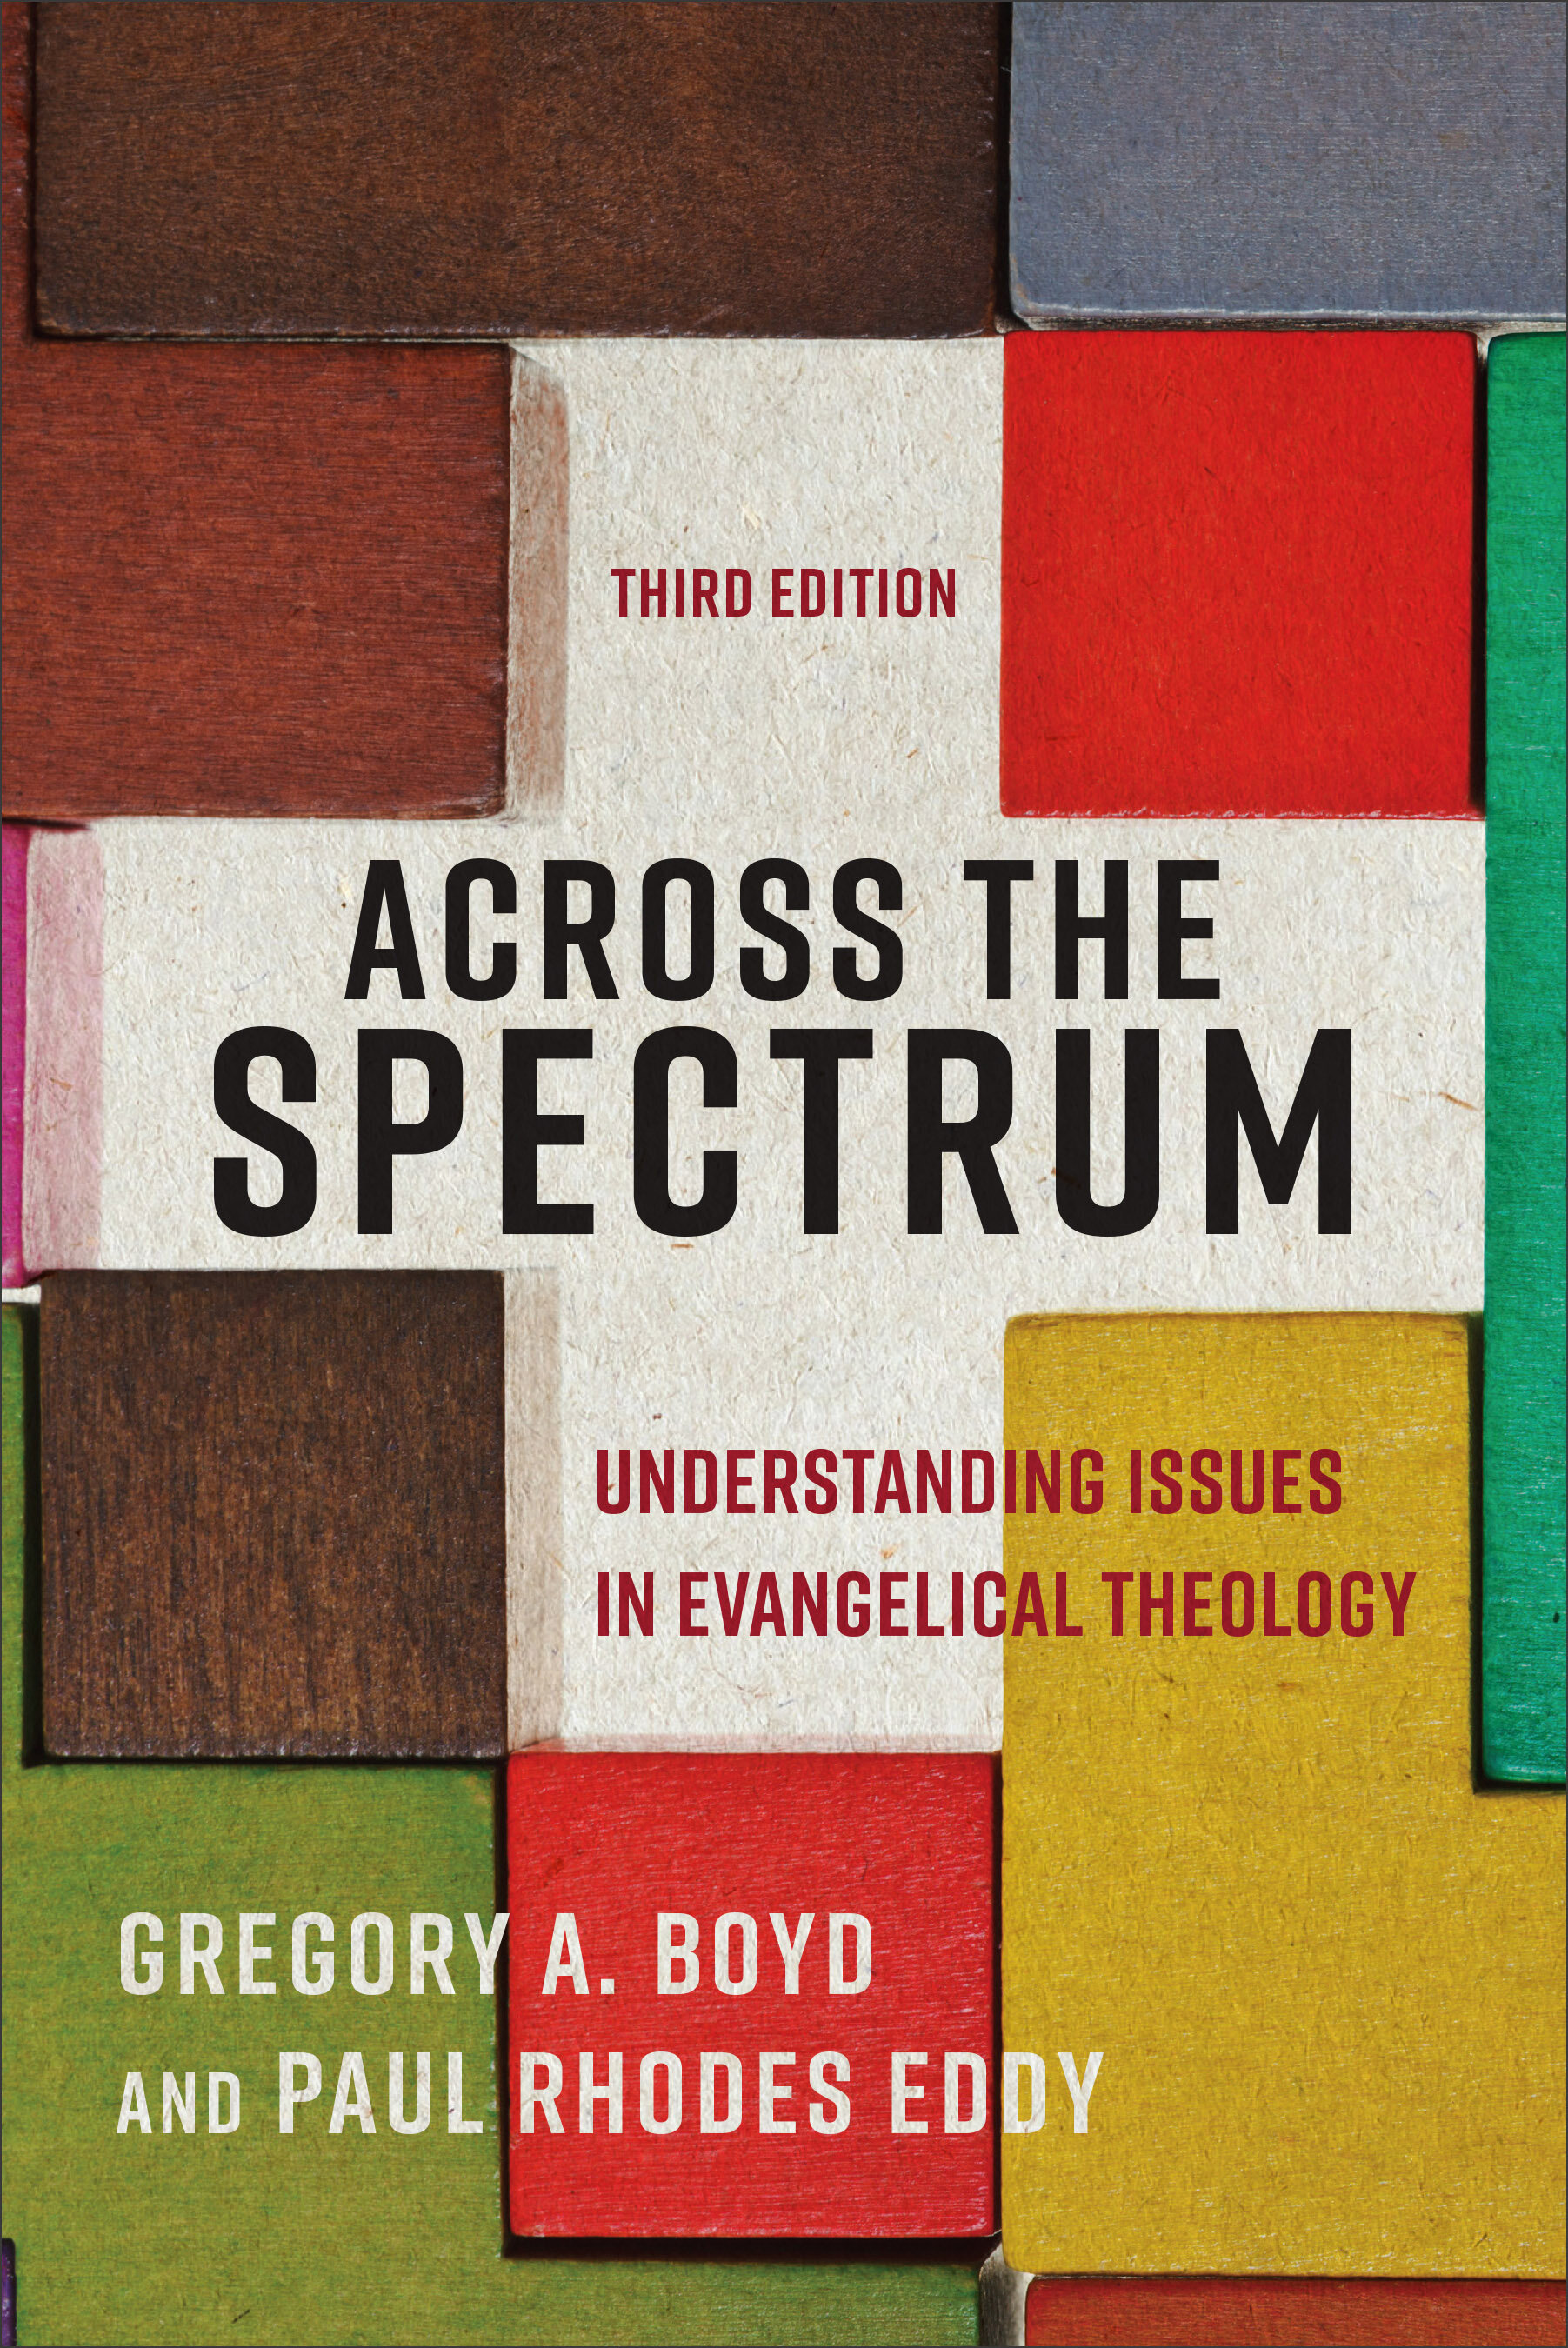 Across the Spectrum: Understanding Issues in Evangelical Theology, 3rd ed.